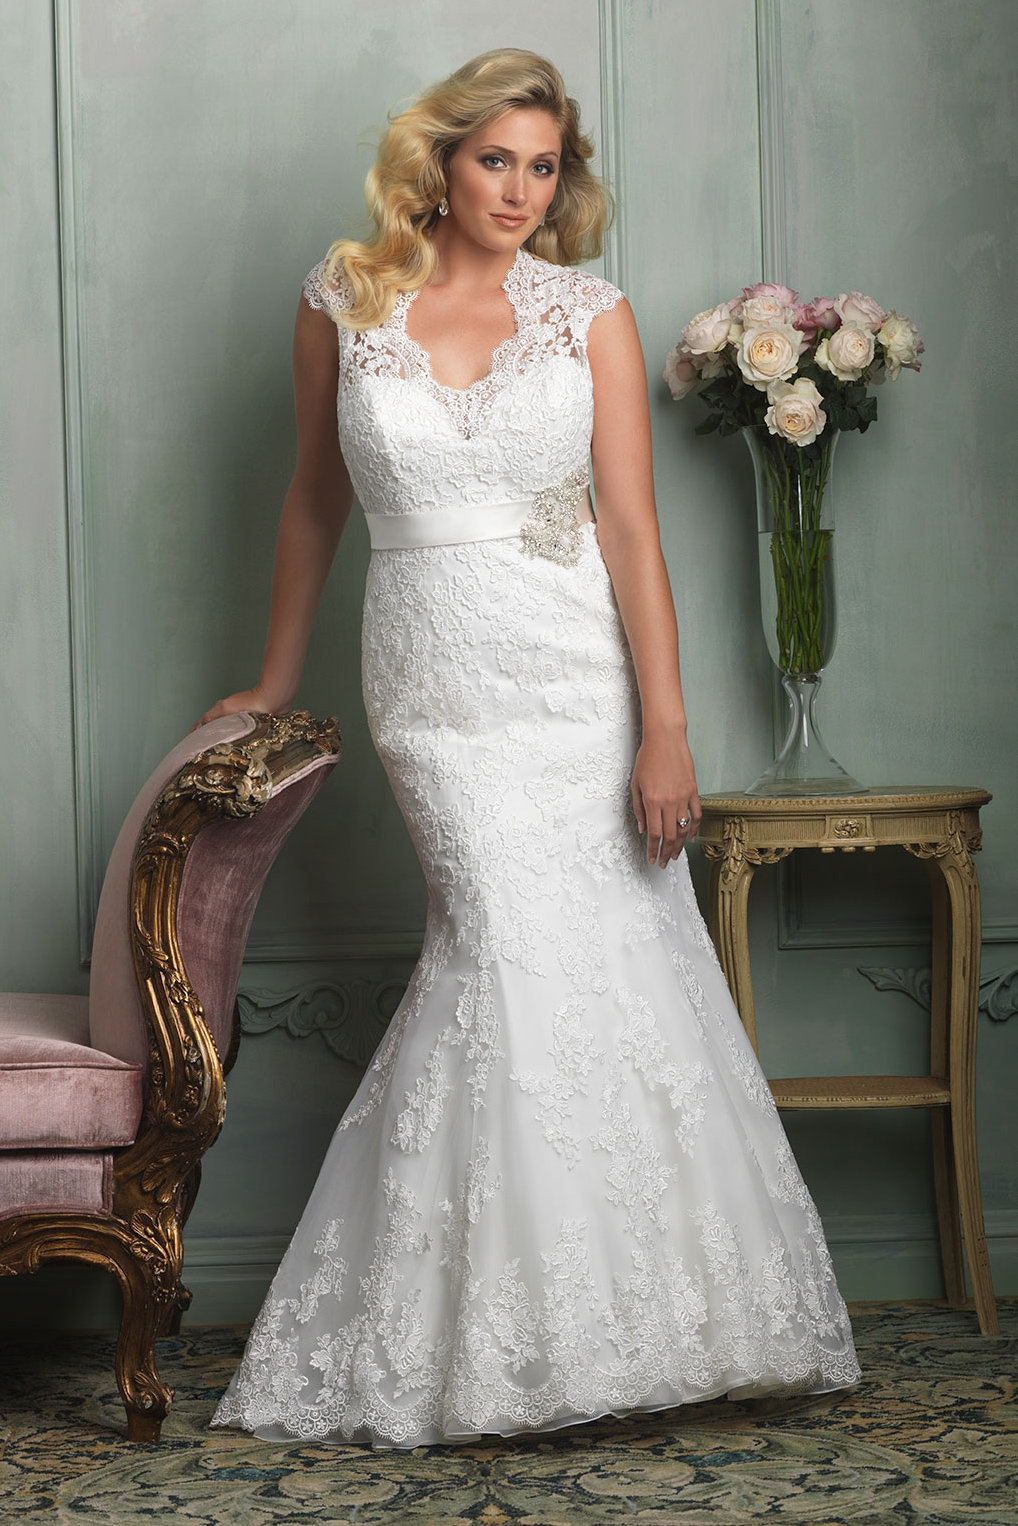 Plus Size Bridal Gowns That Flatter Your Body Shape